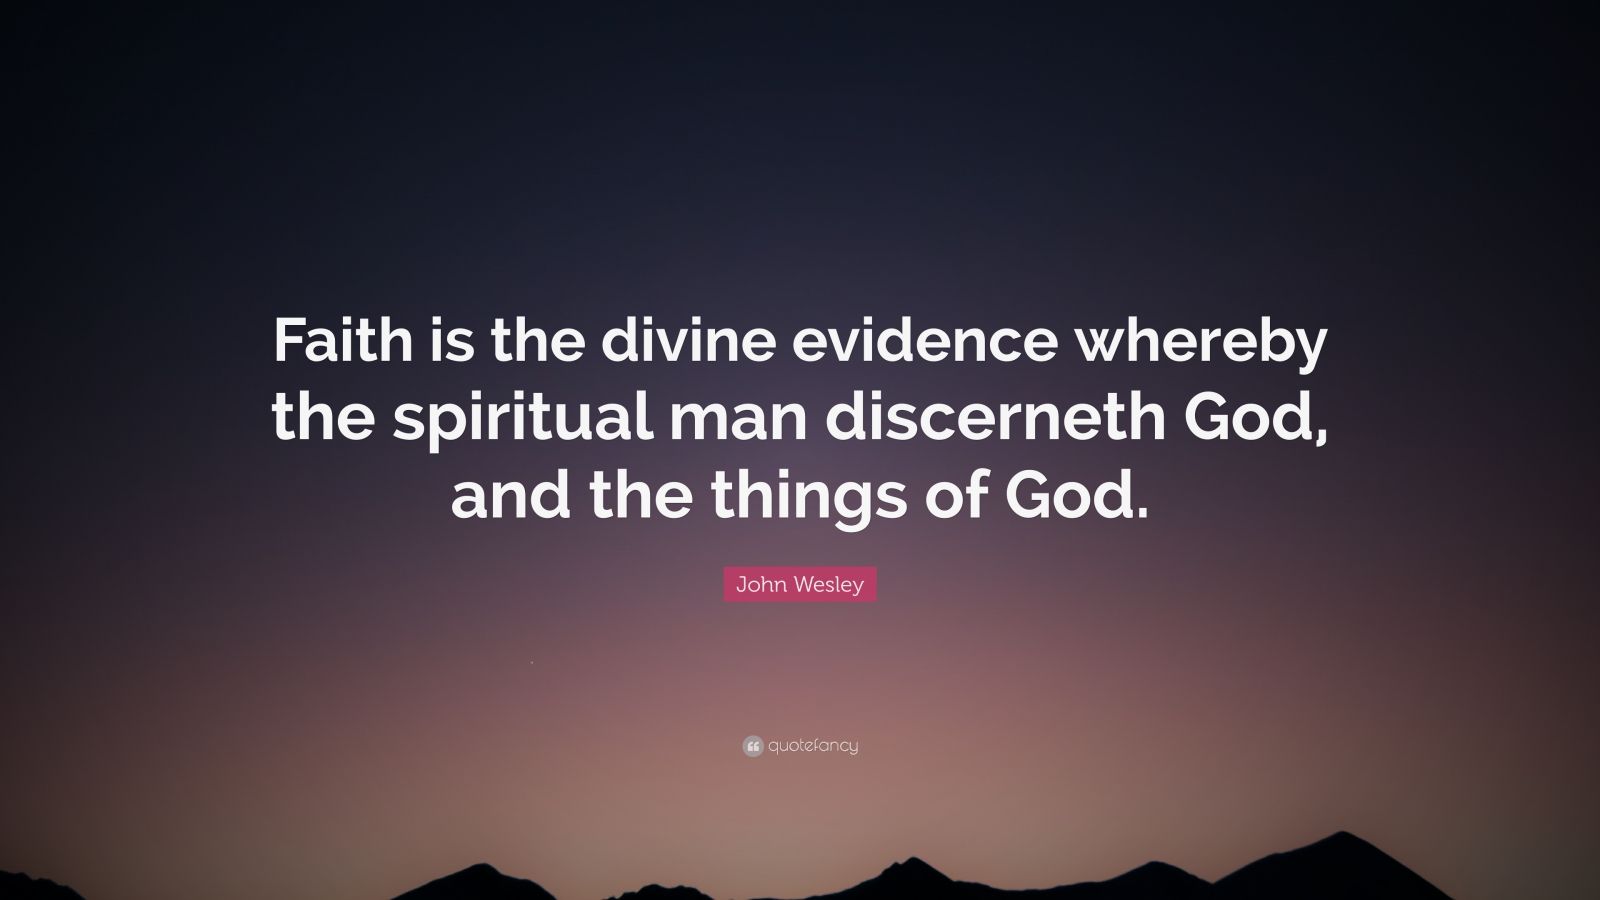 John Wesley Quote: “Faith is the divine evidence whereby the spiritual ...